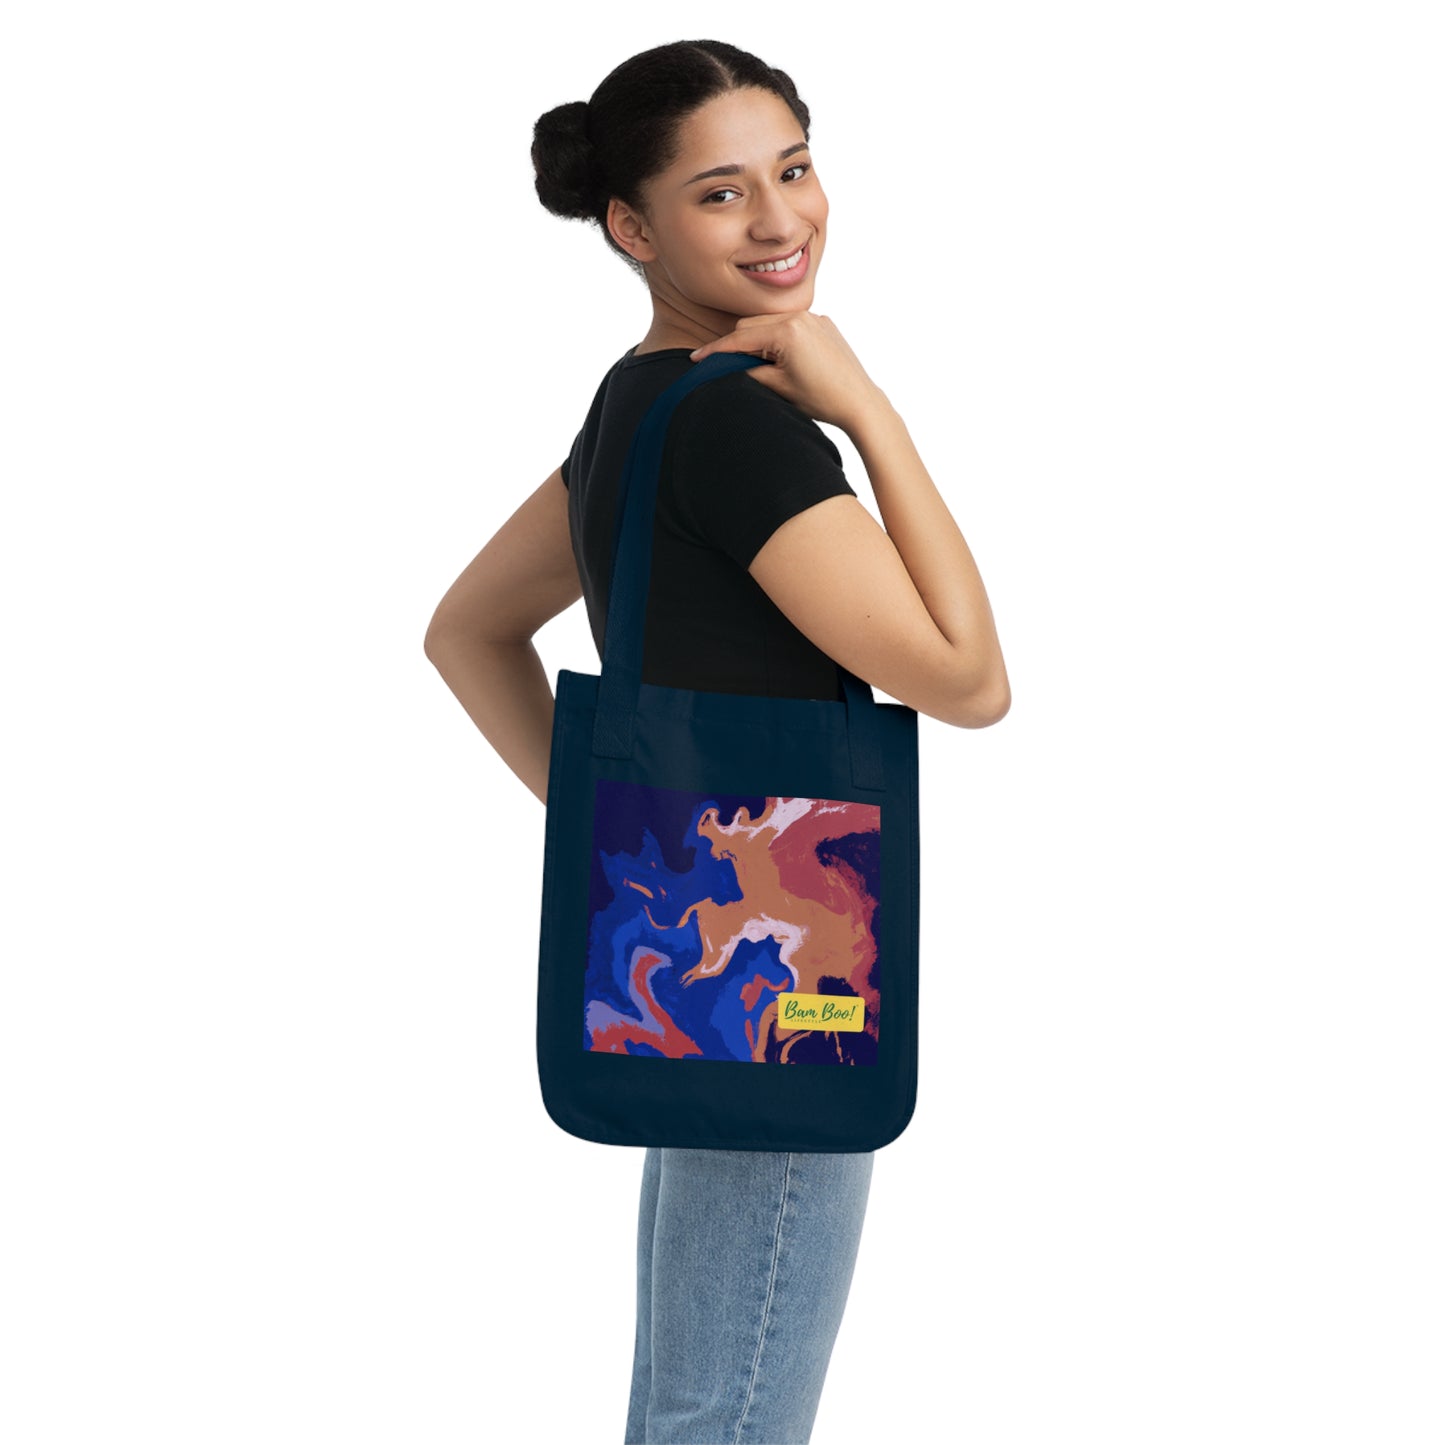 "The Mood Spectrum: Abstract Art For Emotional Expression" - Bam Boo! Lifestyle Eco-friendly Tote Bag